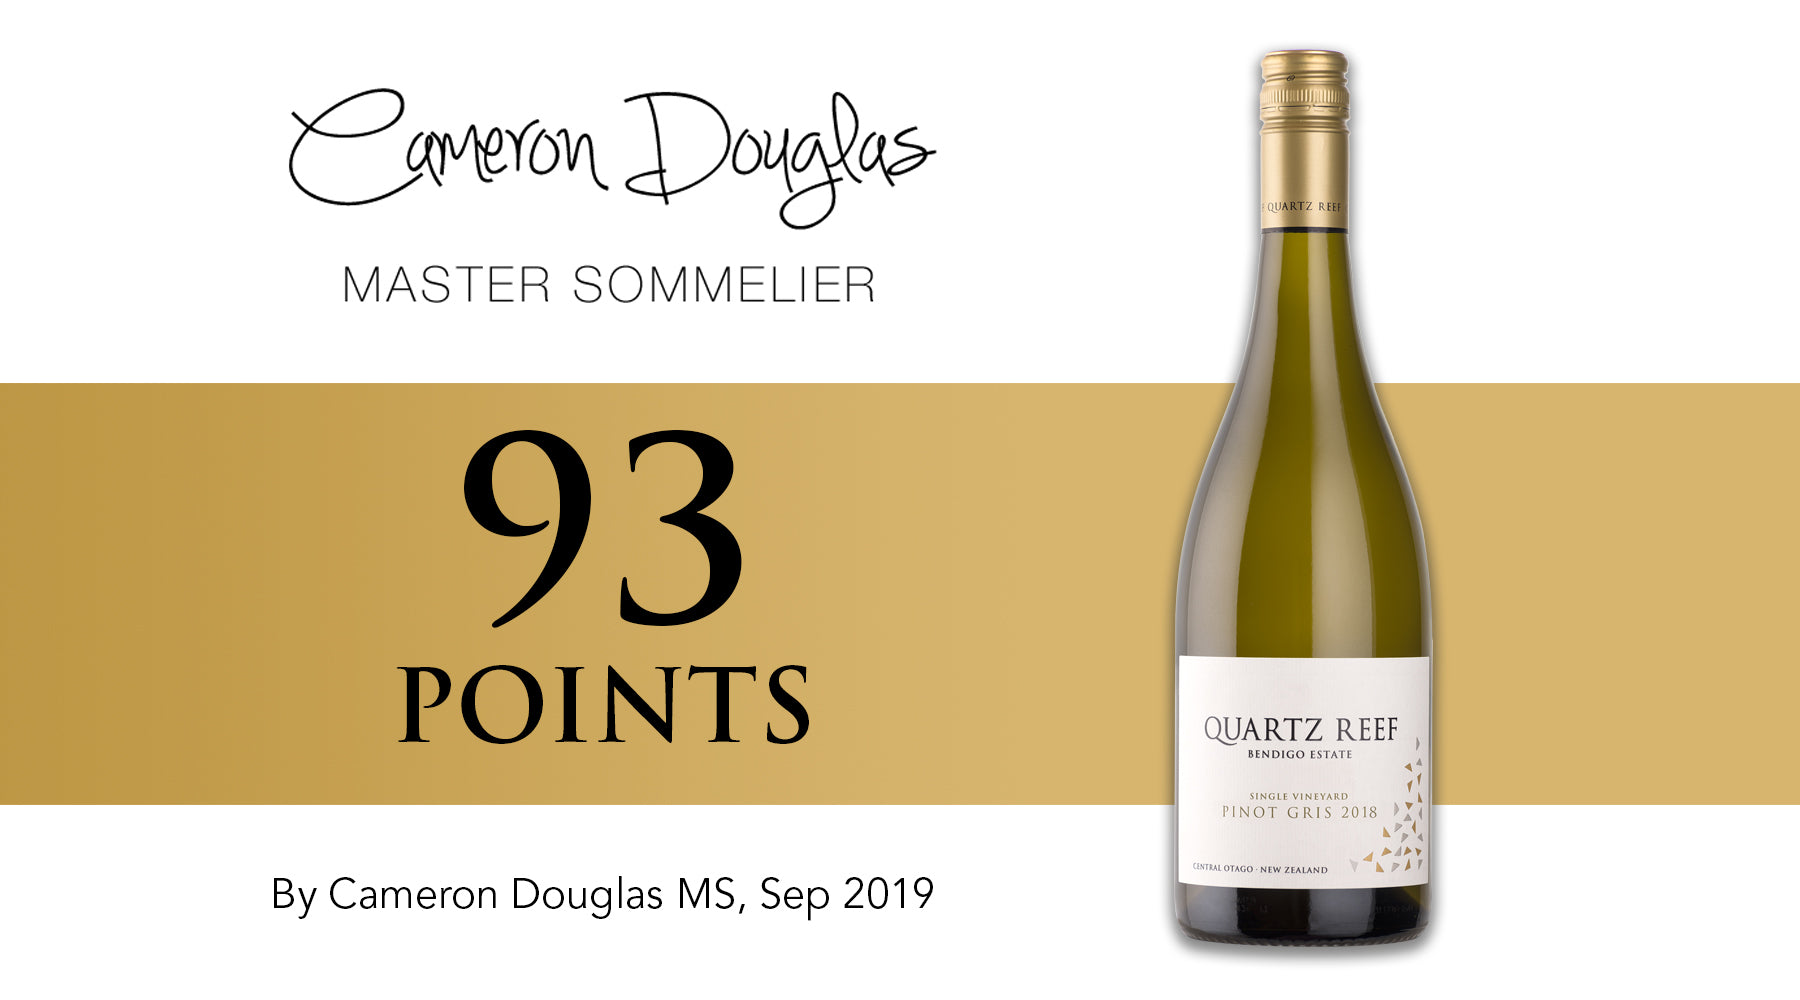 Pinot Gris 2018 - Awarded 93 Points